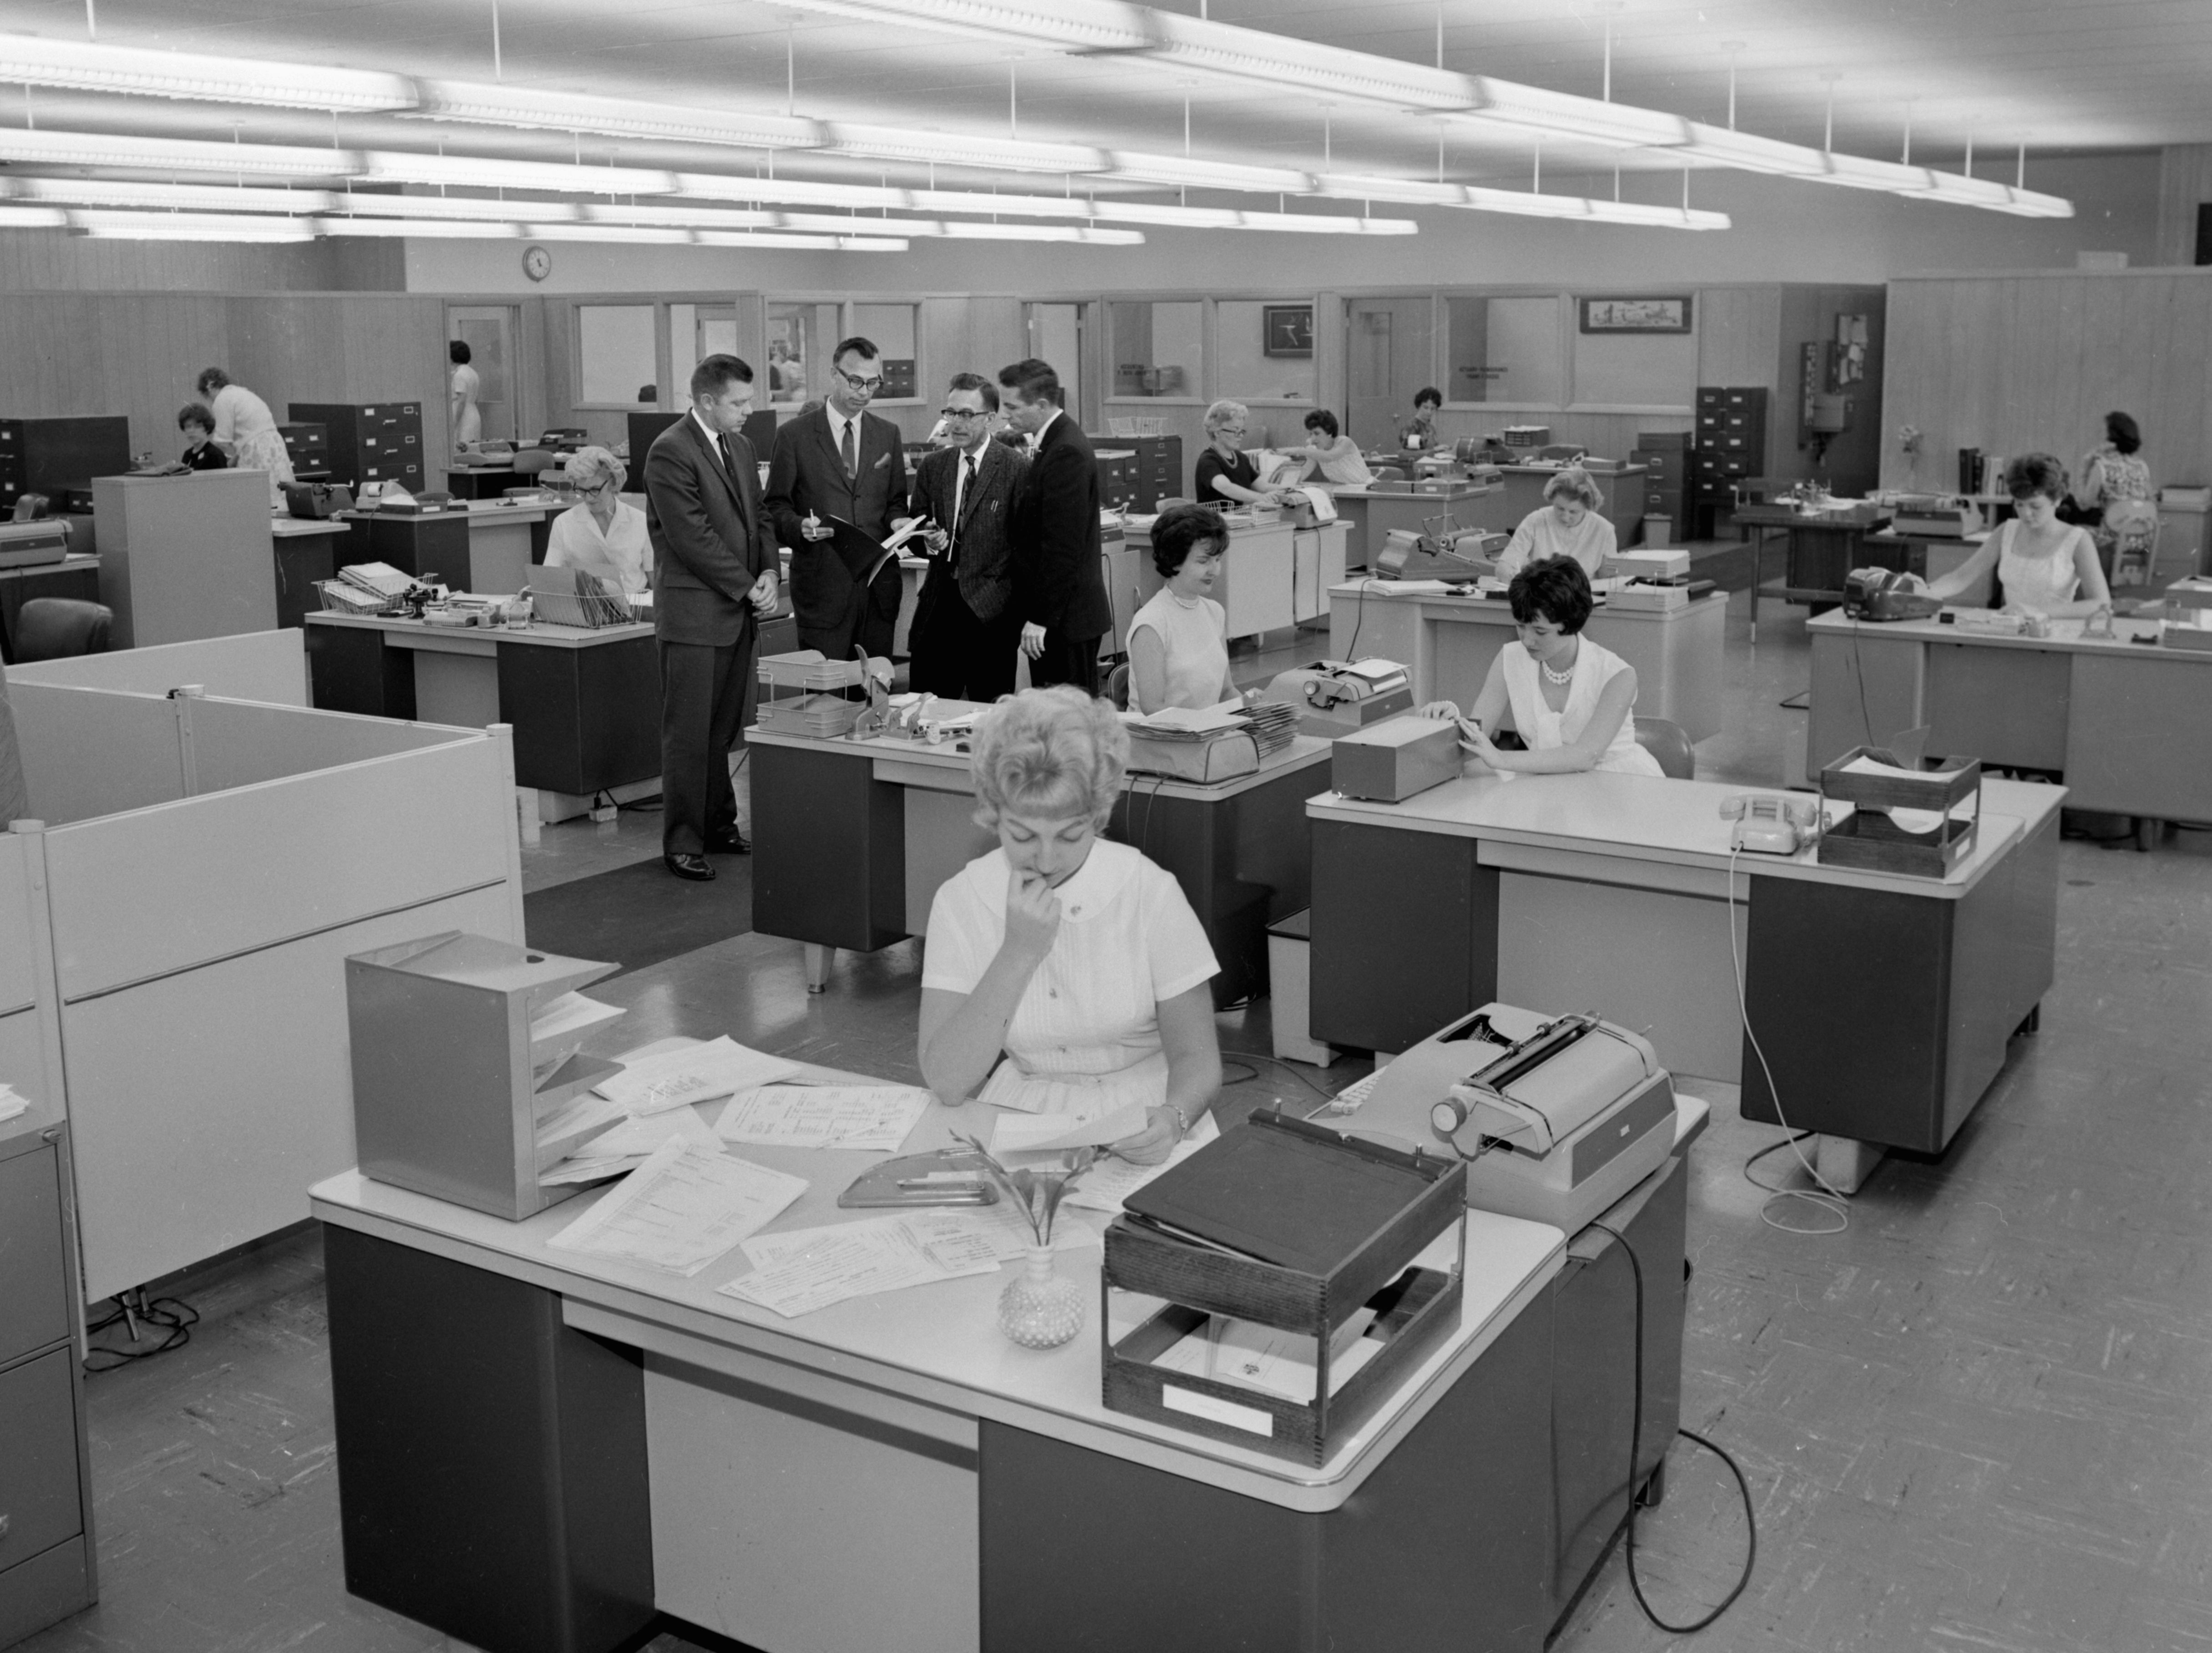 70 Photos of Work Life Through the Years - Vintage Office Pictures